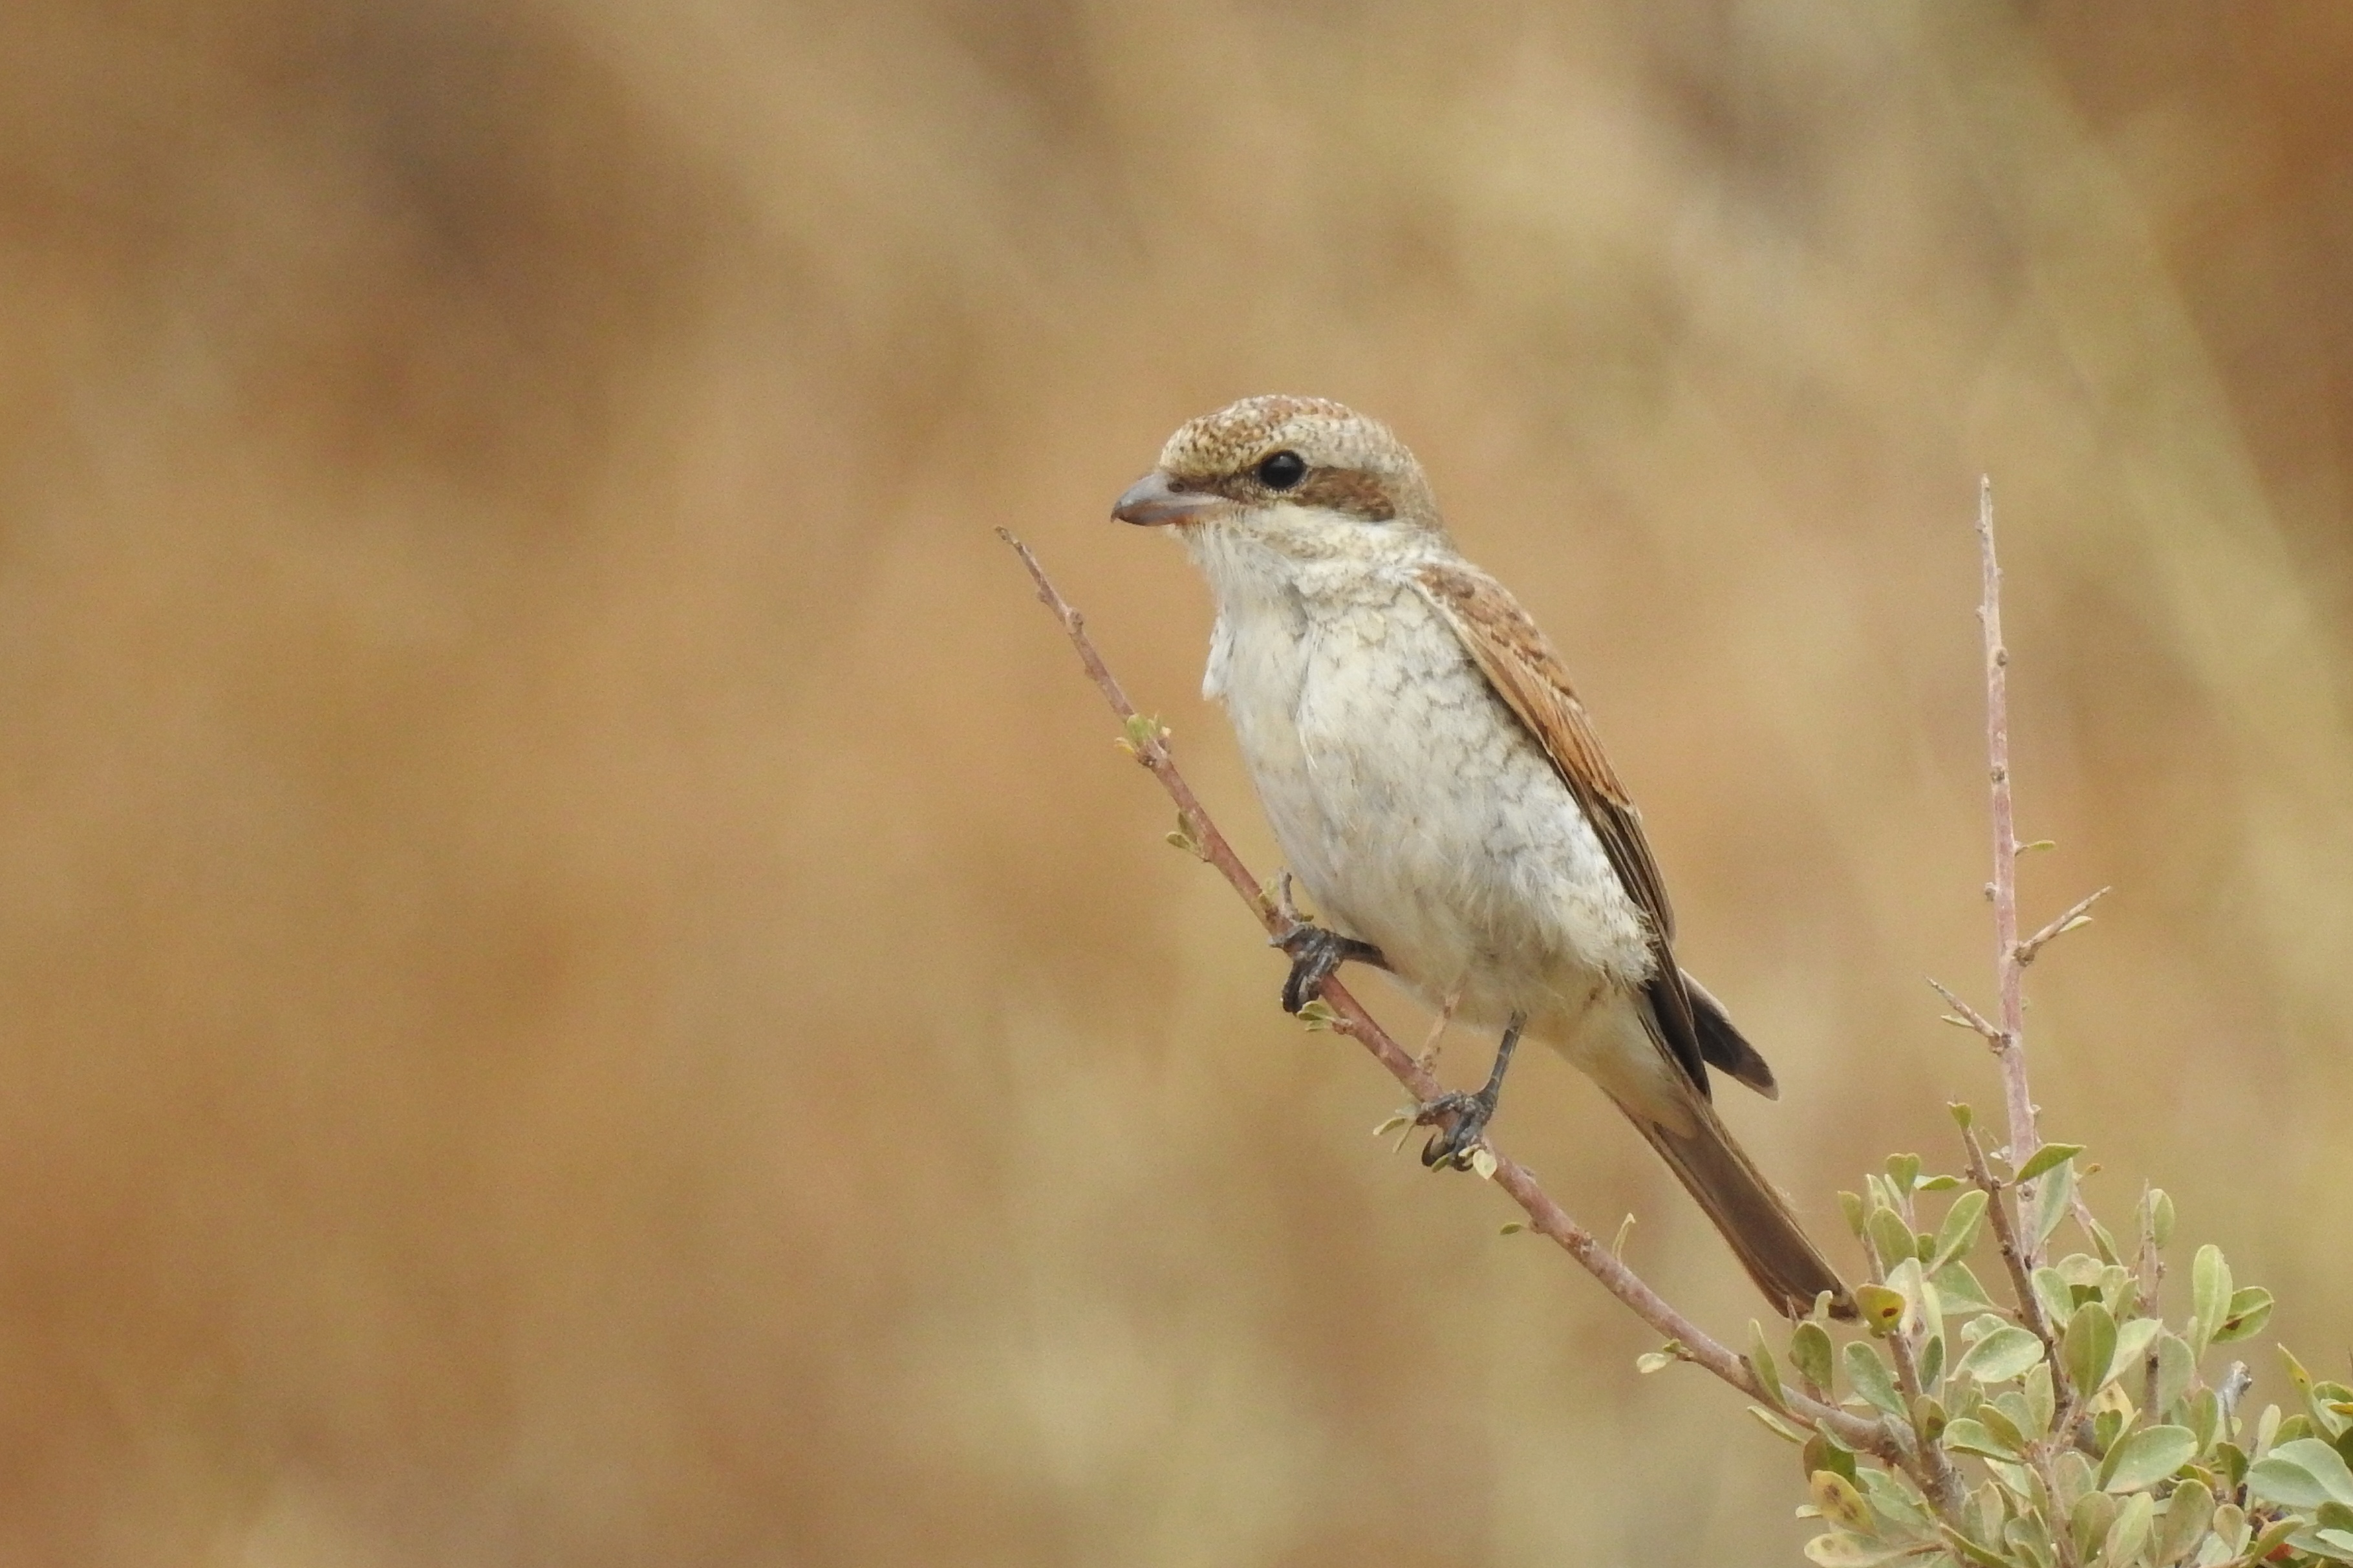 My entry into the photo contest - a juvenile red-backed shrike